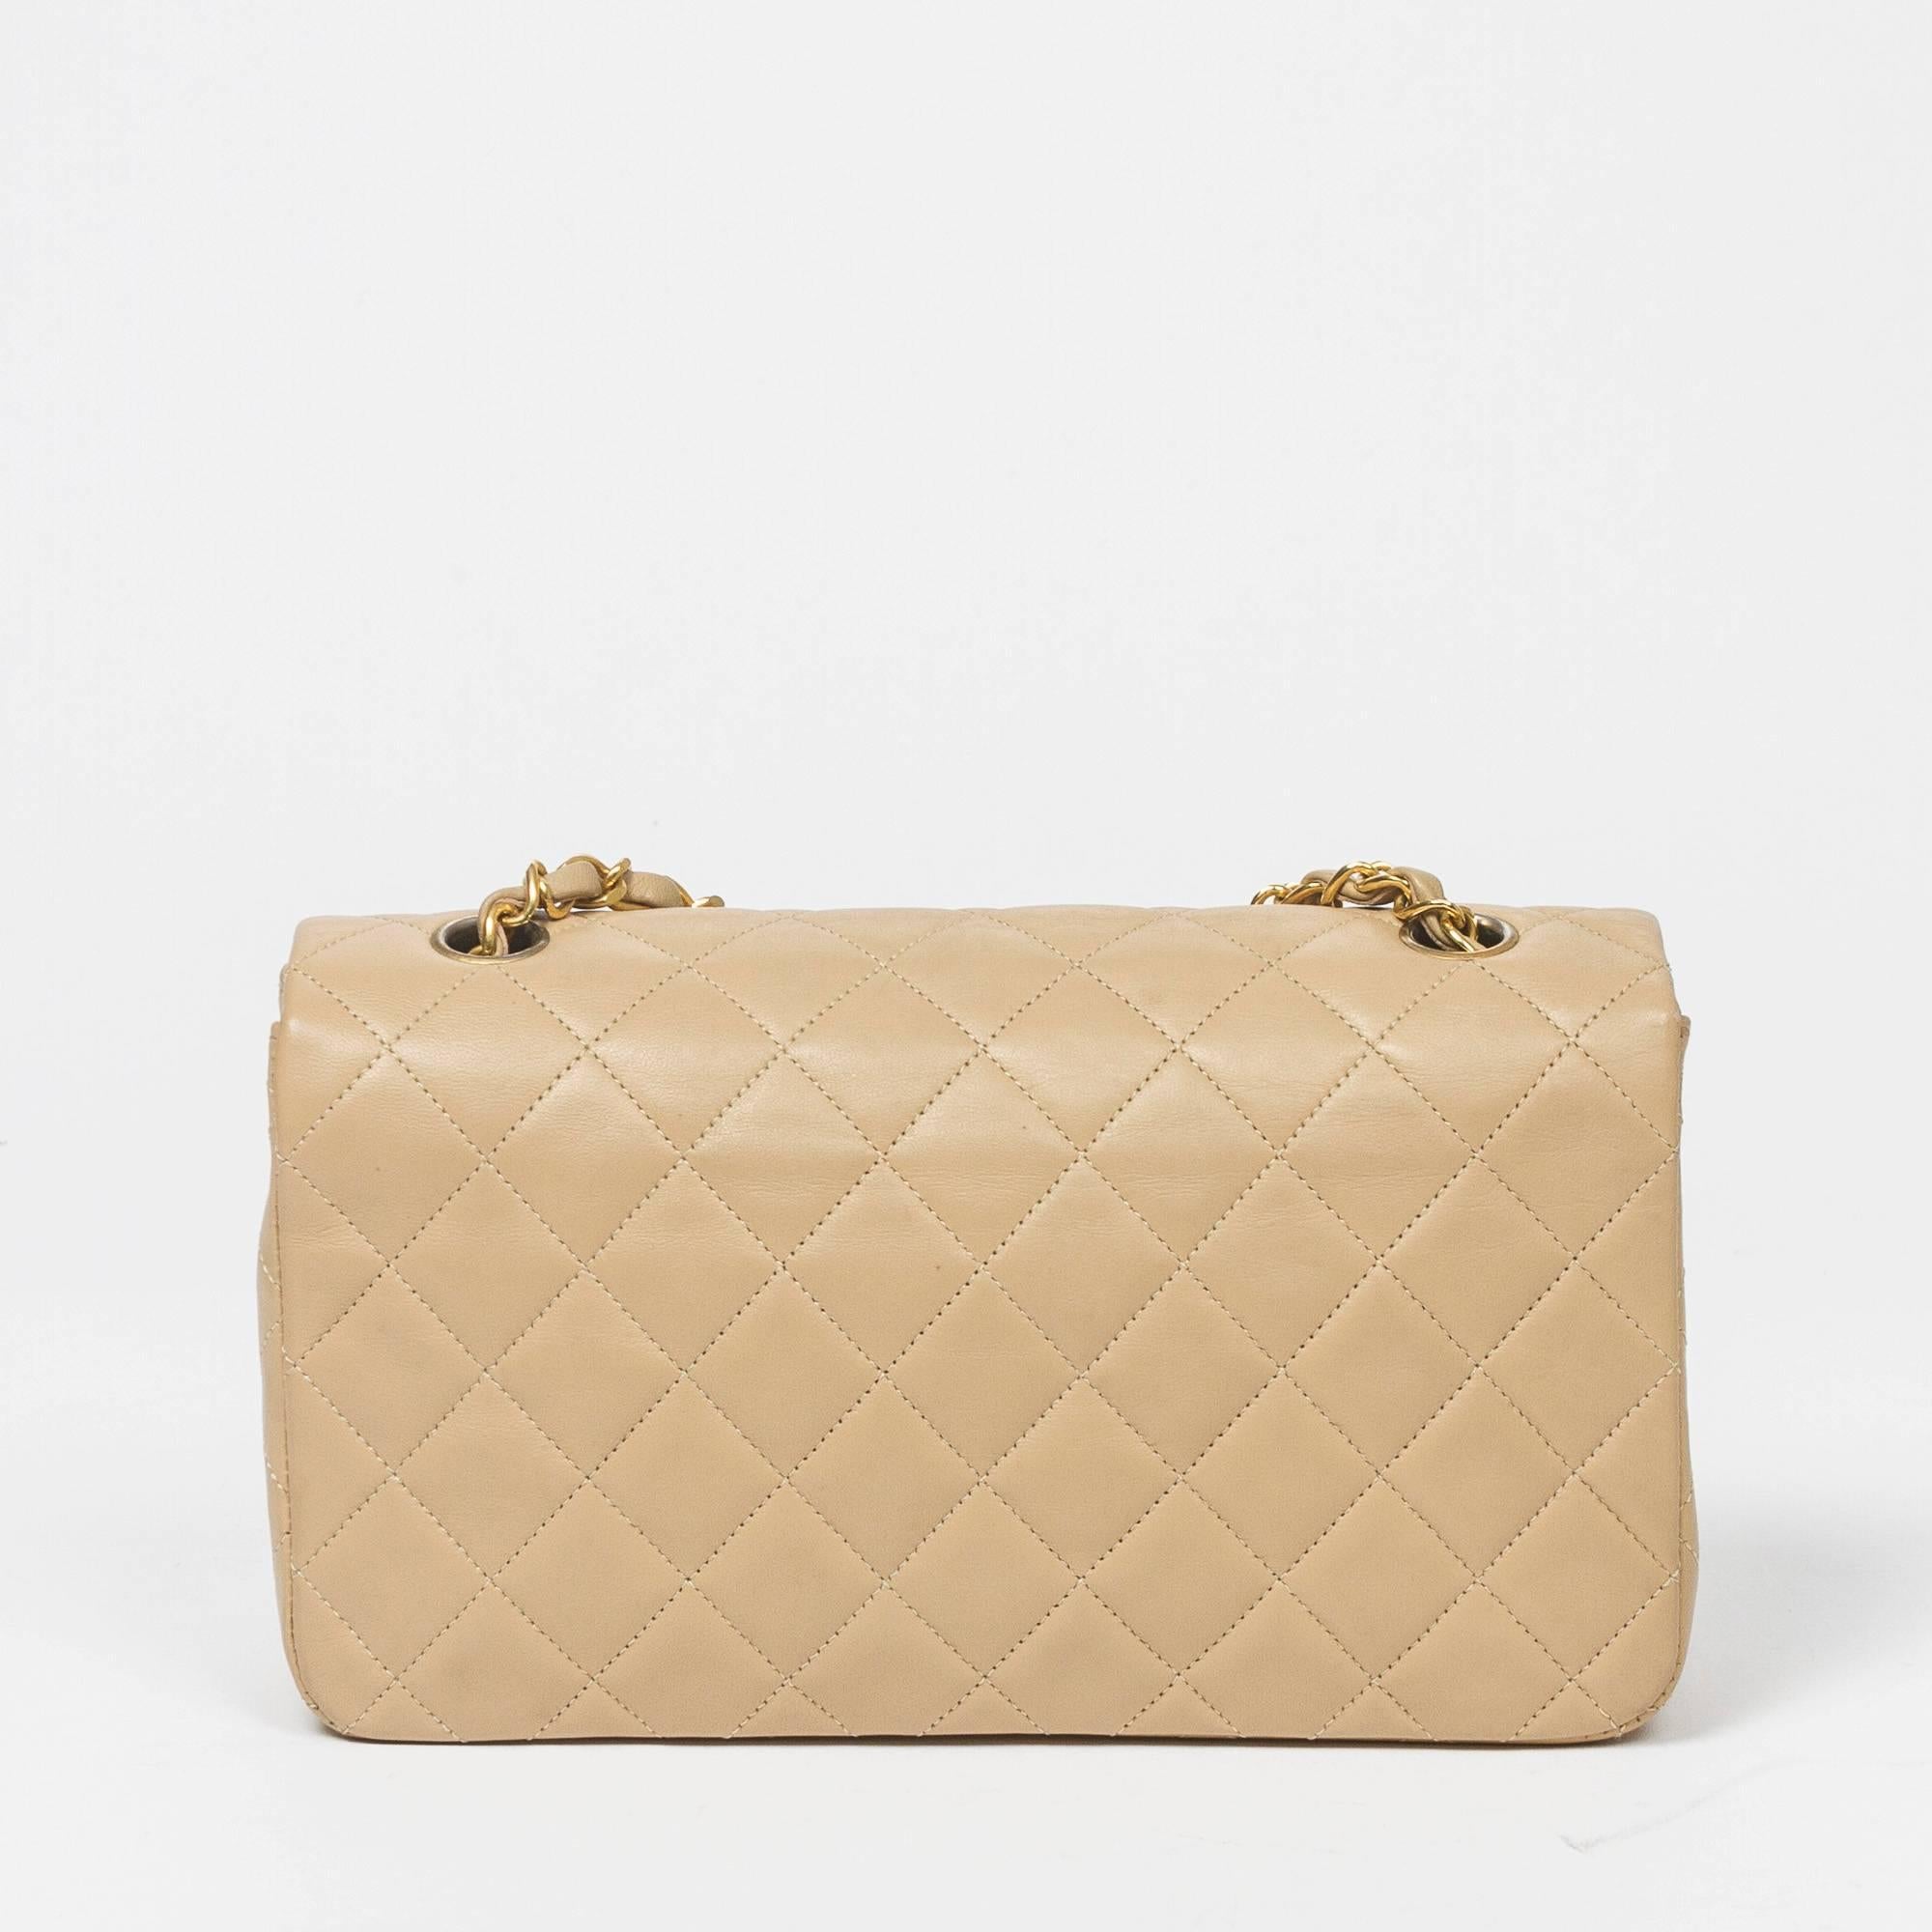 Women's Chanel - Vintage Full Flap Bag Beige Quilted Leather